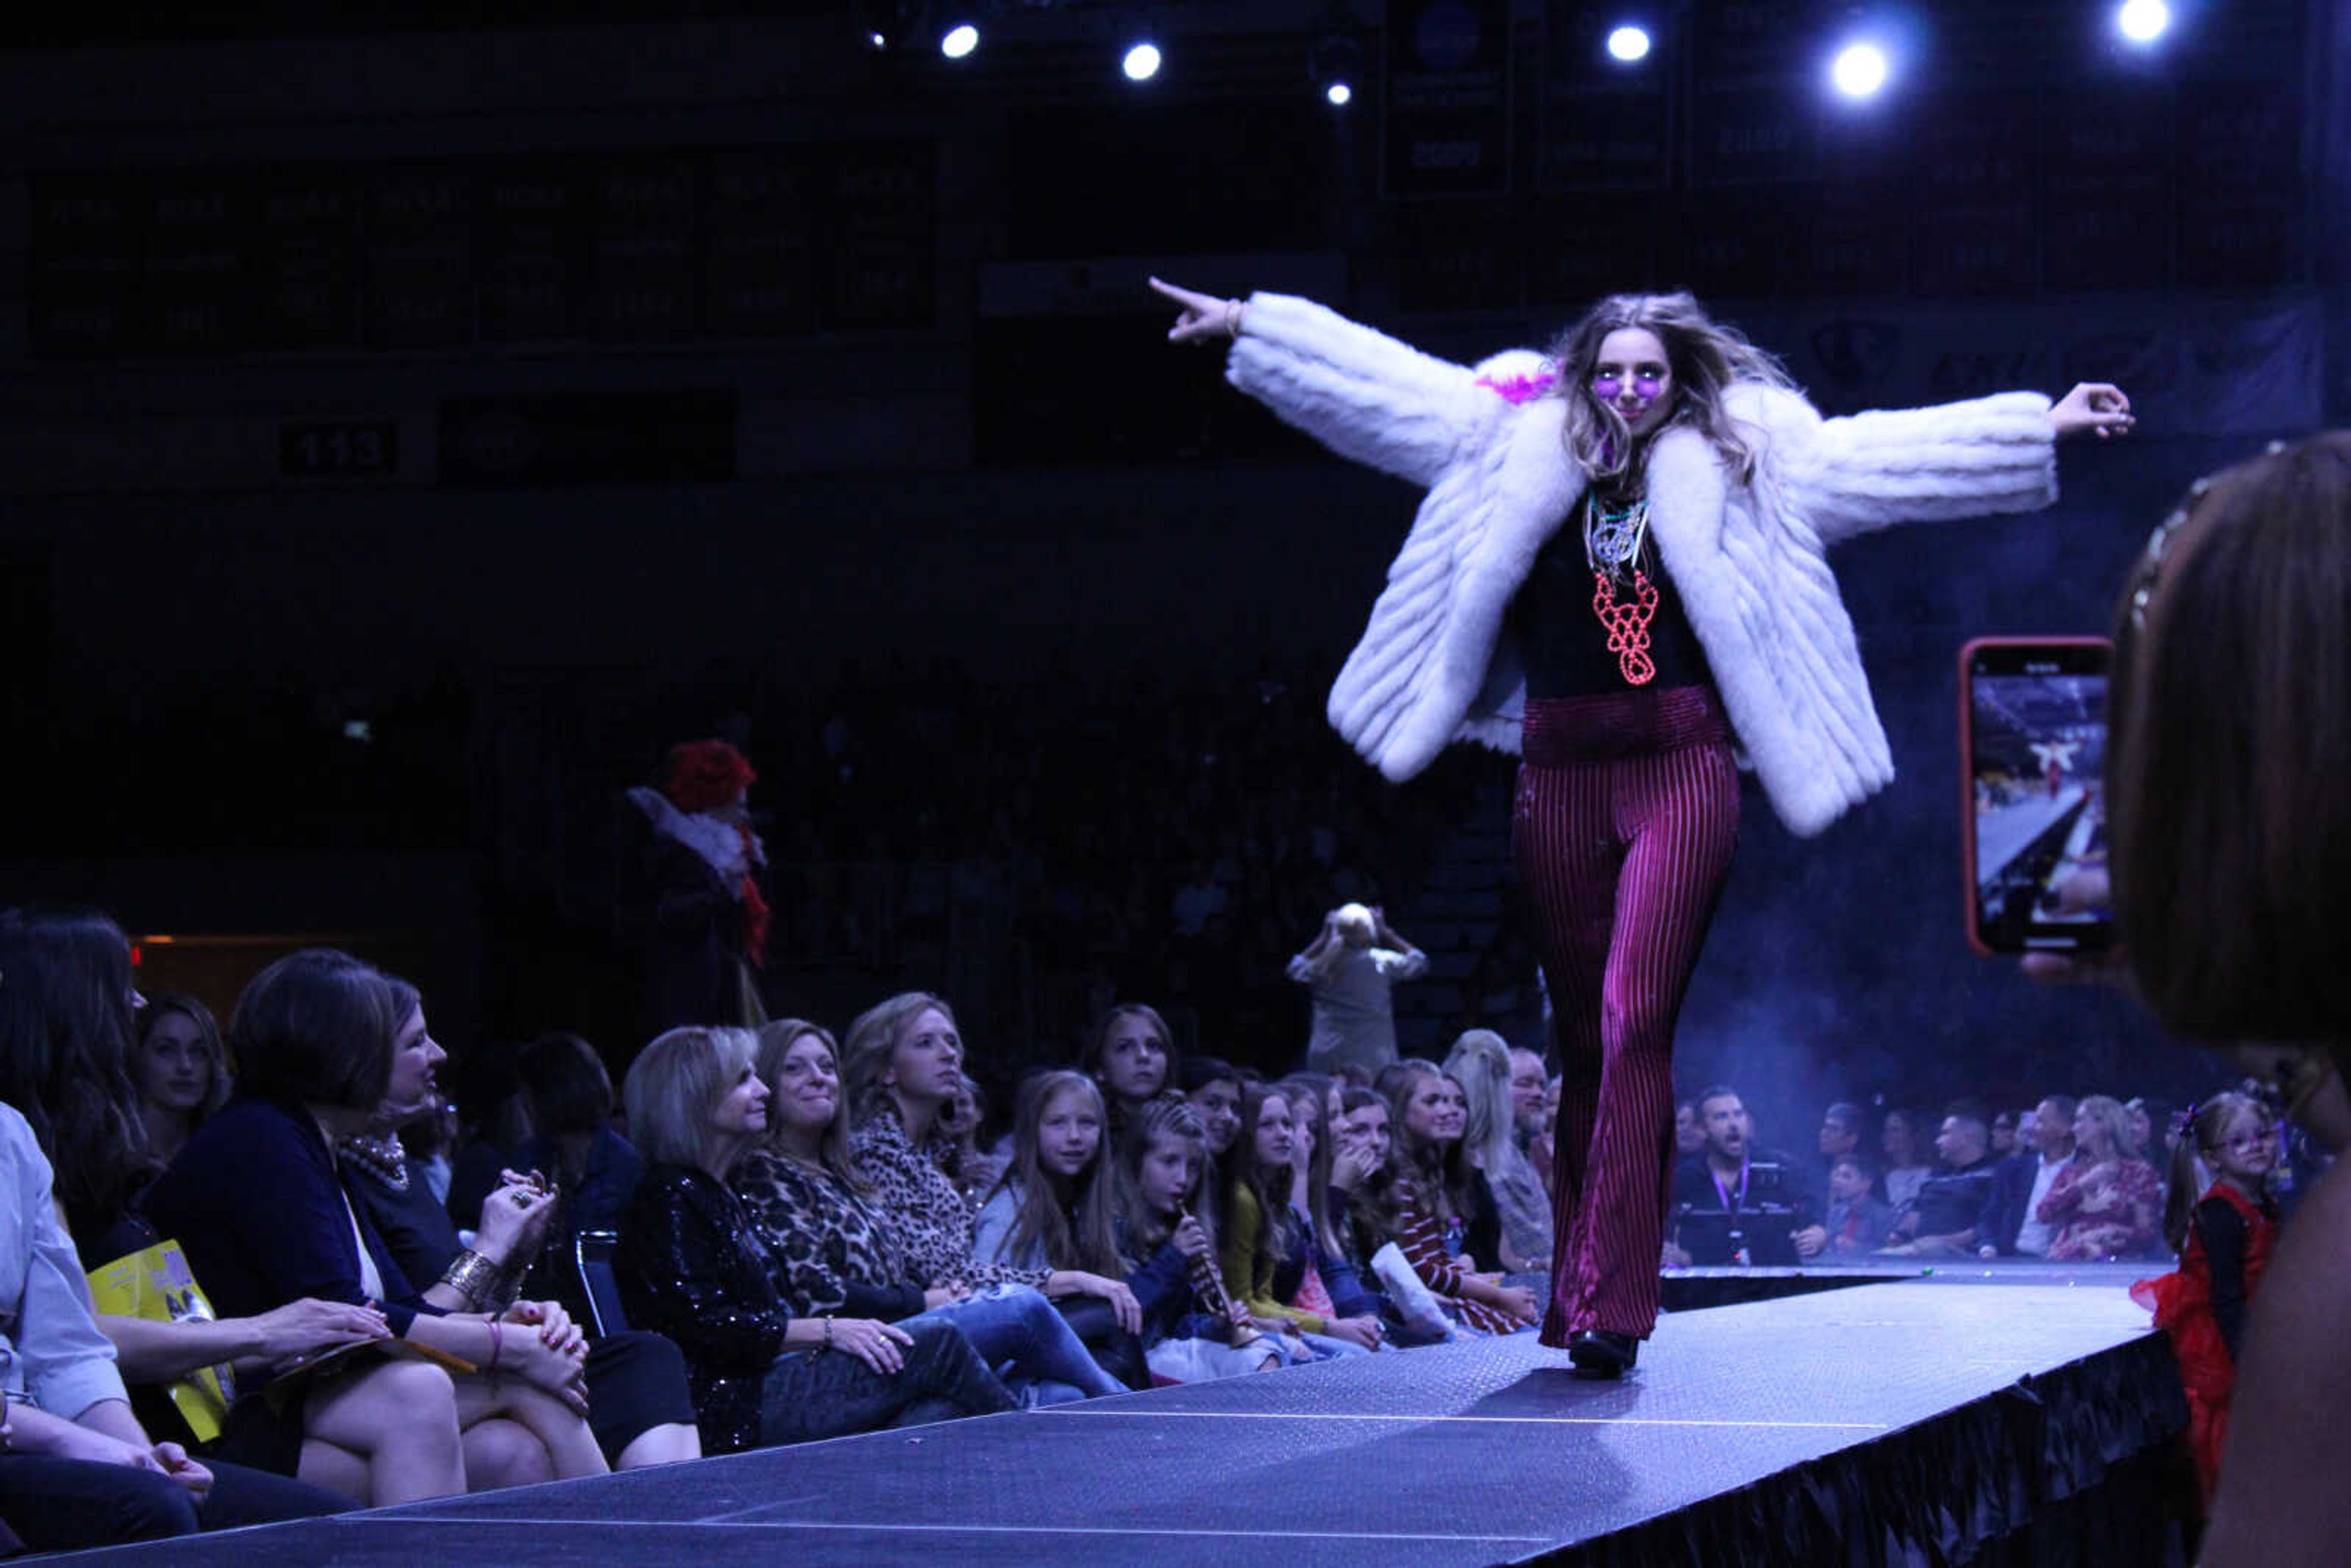 Katelyn Lollas, wearing fuchsia tinted sunglasses, a large fur coat and pleated flare pants, is seen walking the runway as Janis Joplin during the 2019 VintageNOW fashion show.